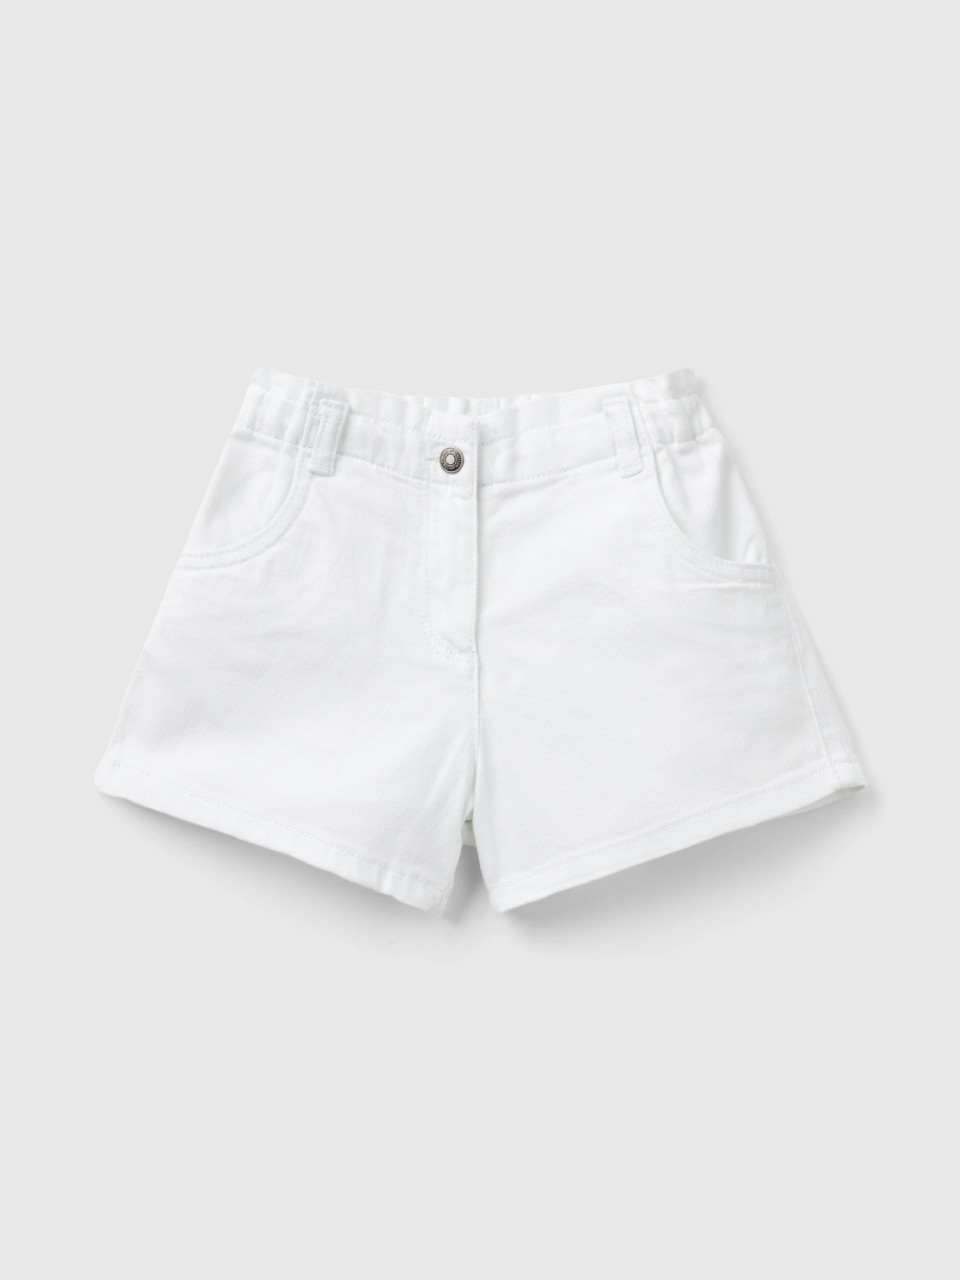 Benetton, Paperbag Shorts In Stretch Cotton, White, Kids